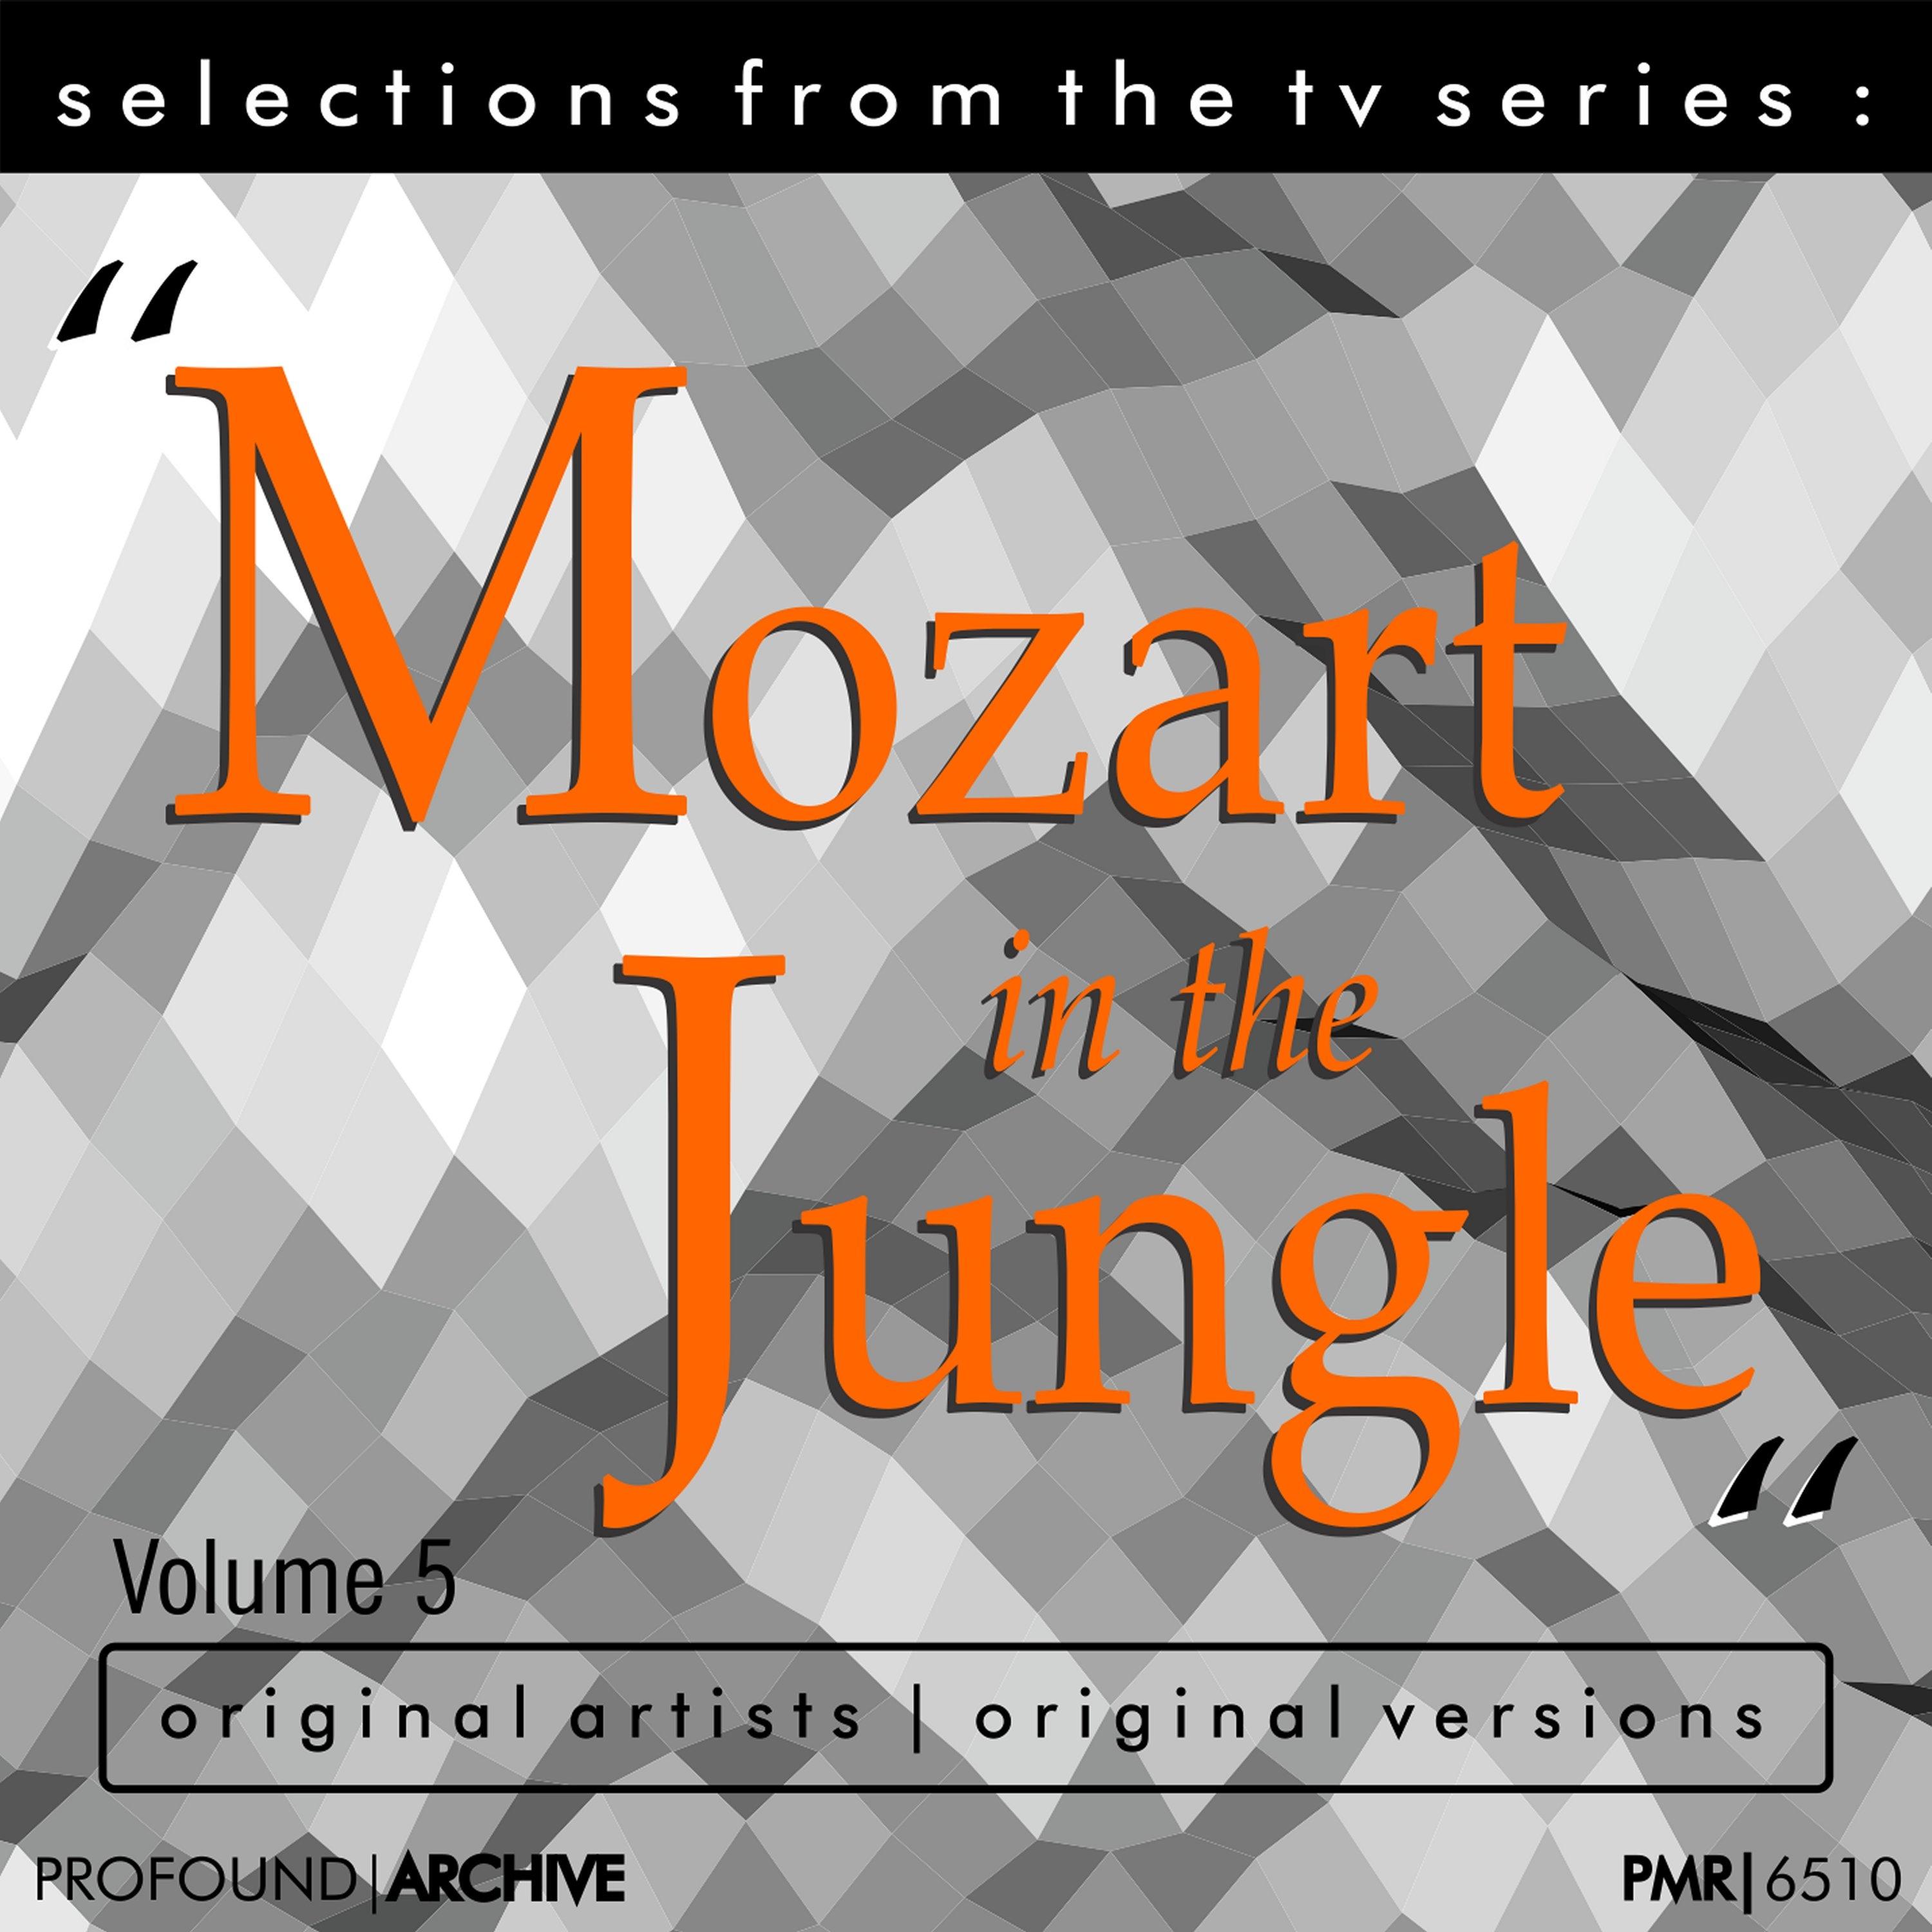 Selections from the TV Serie Mozart in the Jungle Volume 5